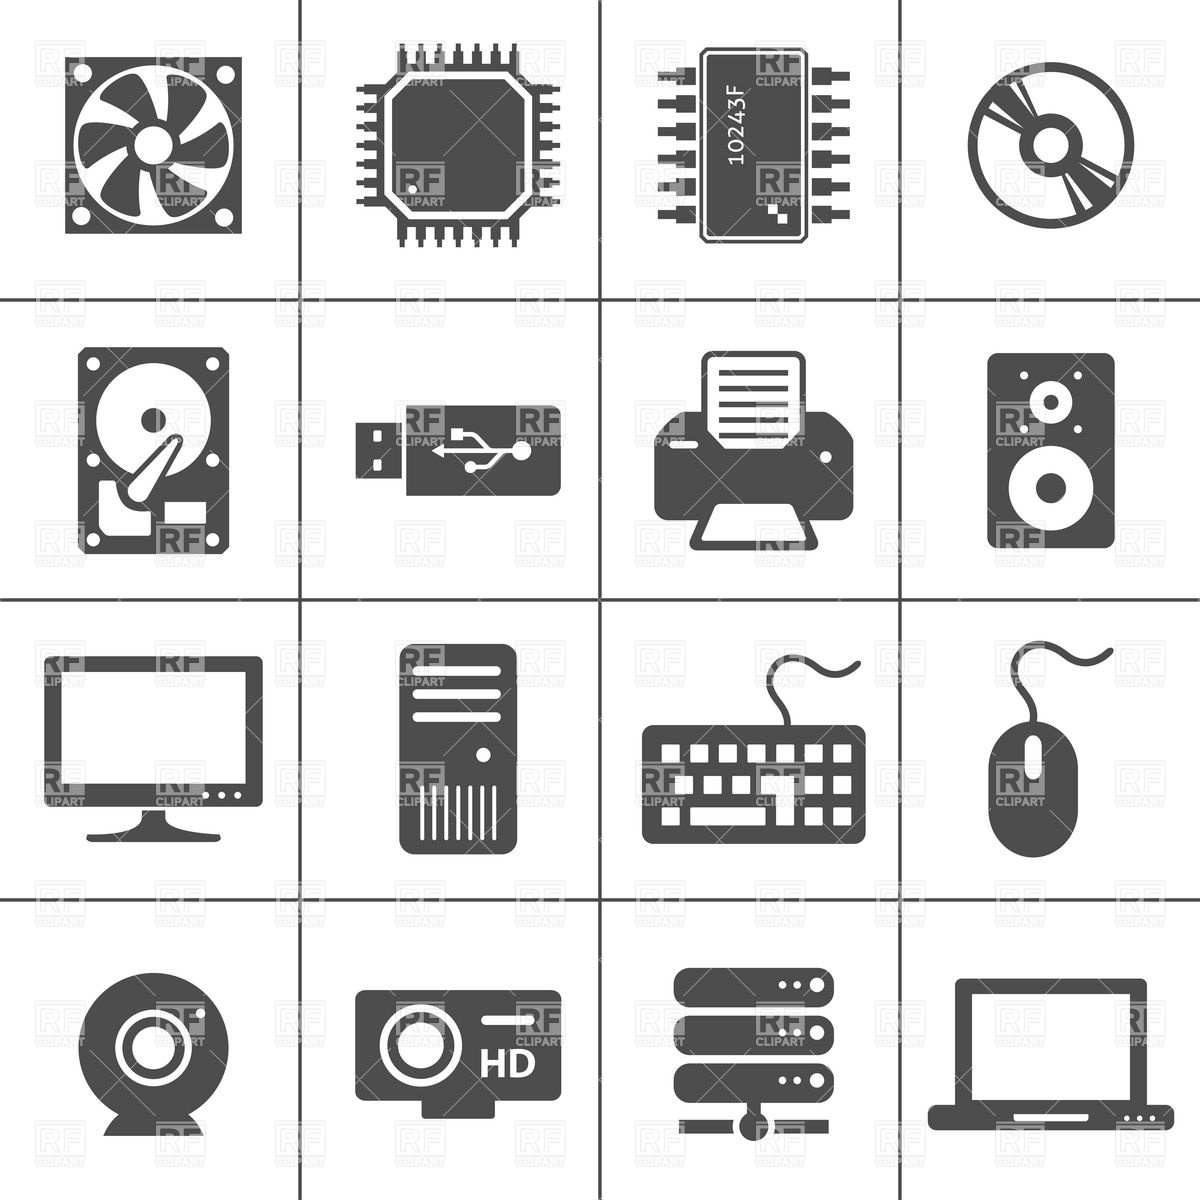 Computer Hardware Icons   Pc Components 5943 Download Royalty Free